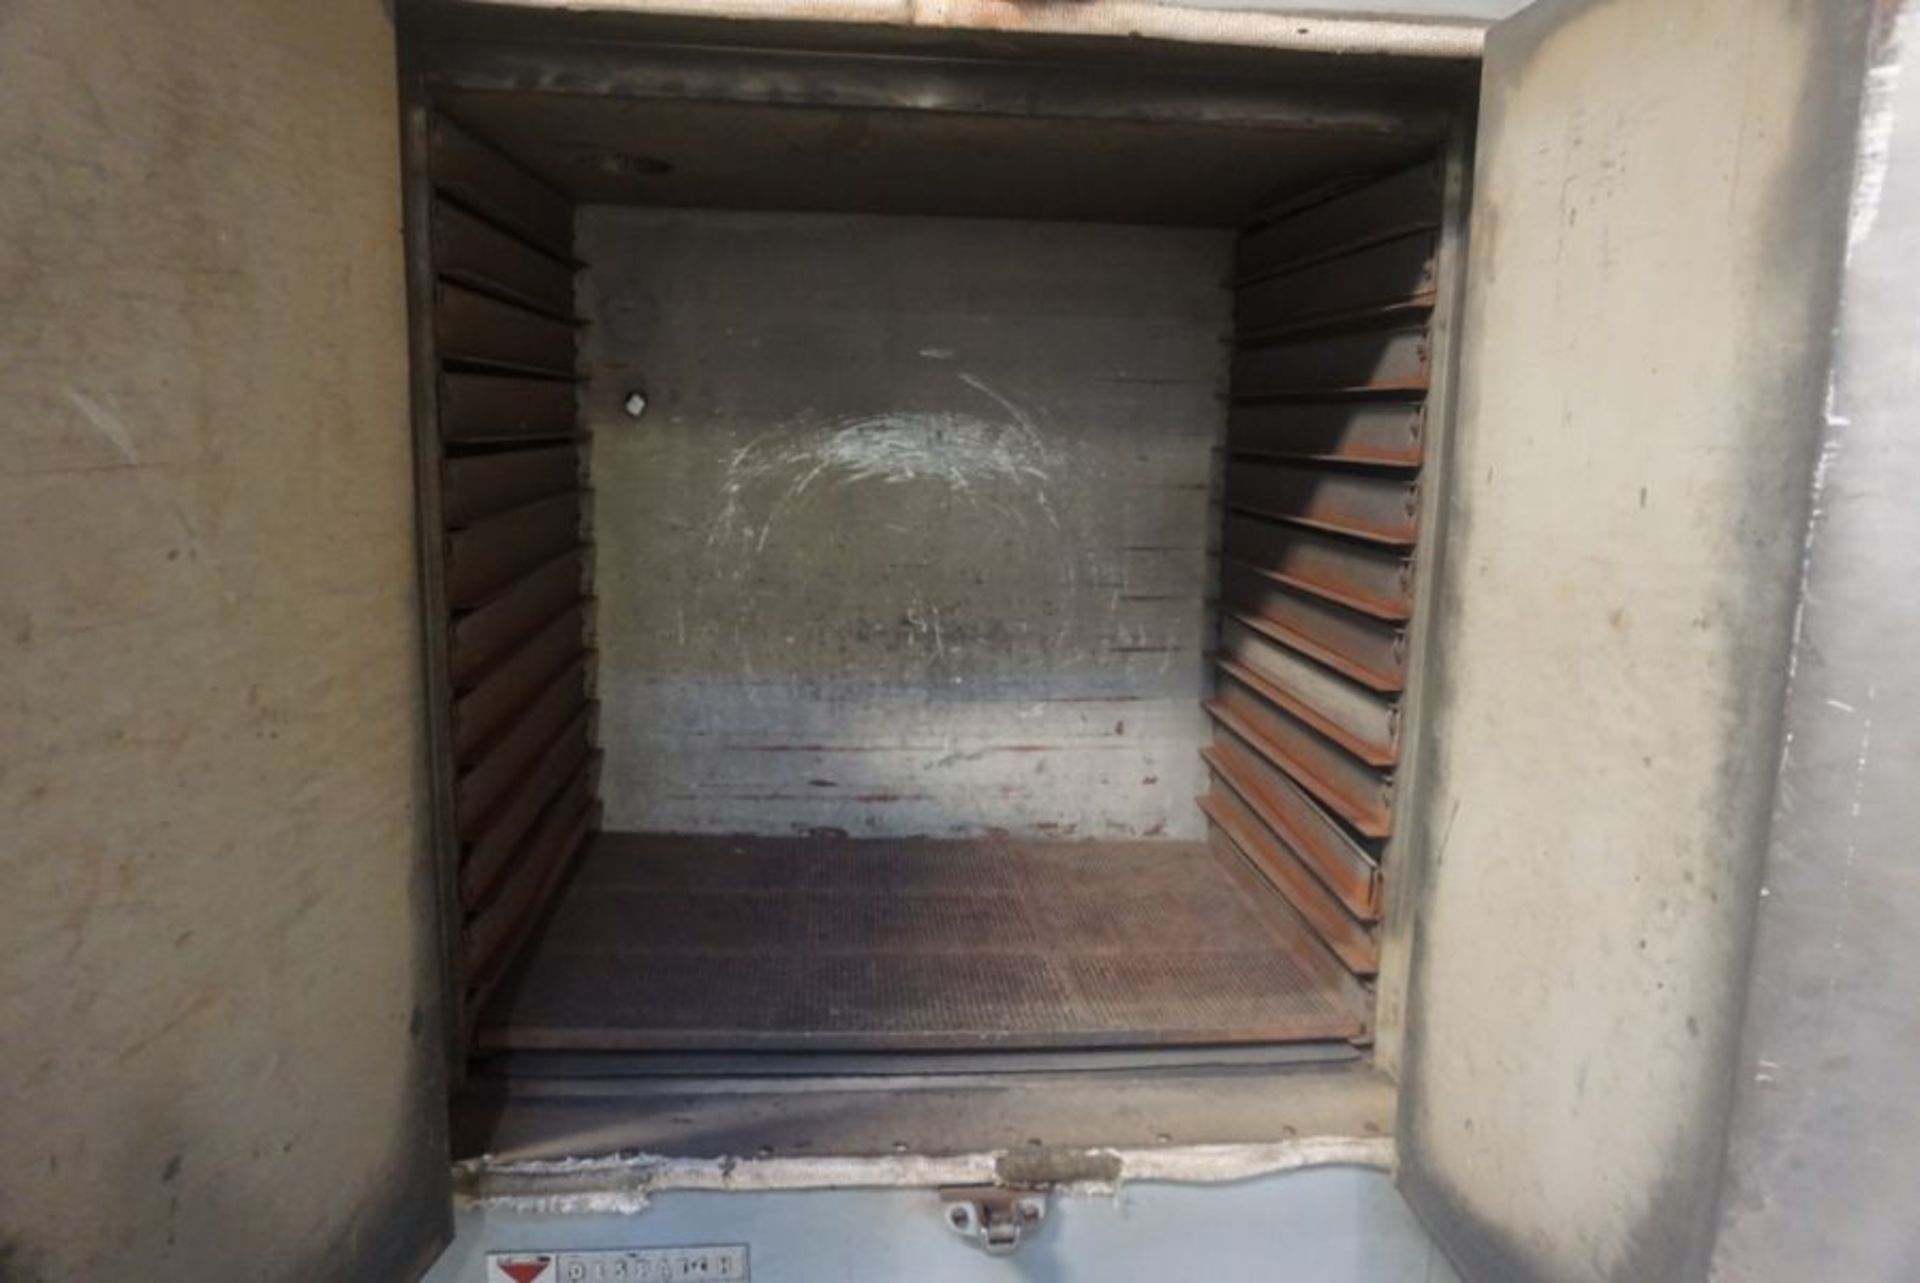 Despatch V-29SD 850 Degree Max. Temp. Curing Oven, s/n 93275 - Image 5 of 6